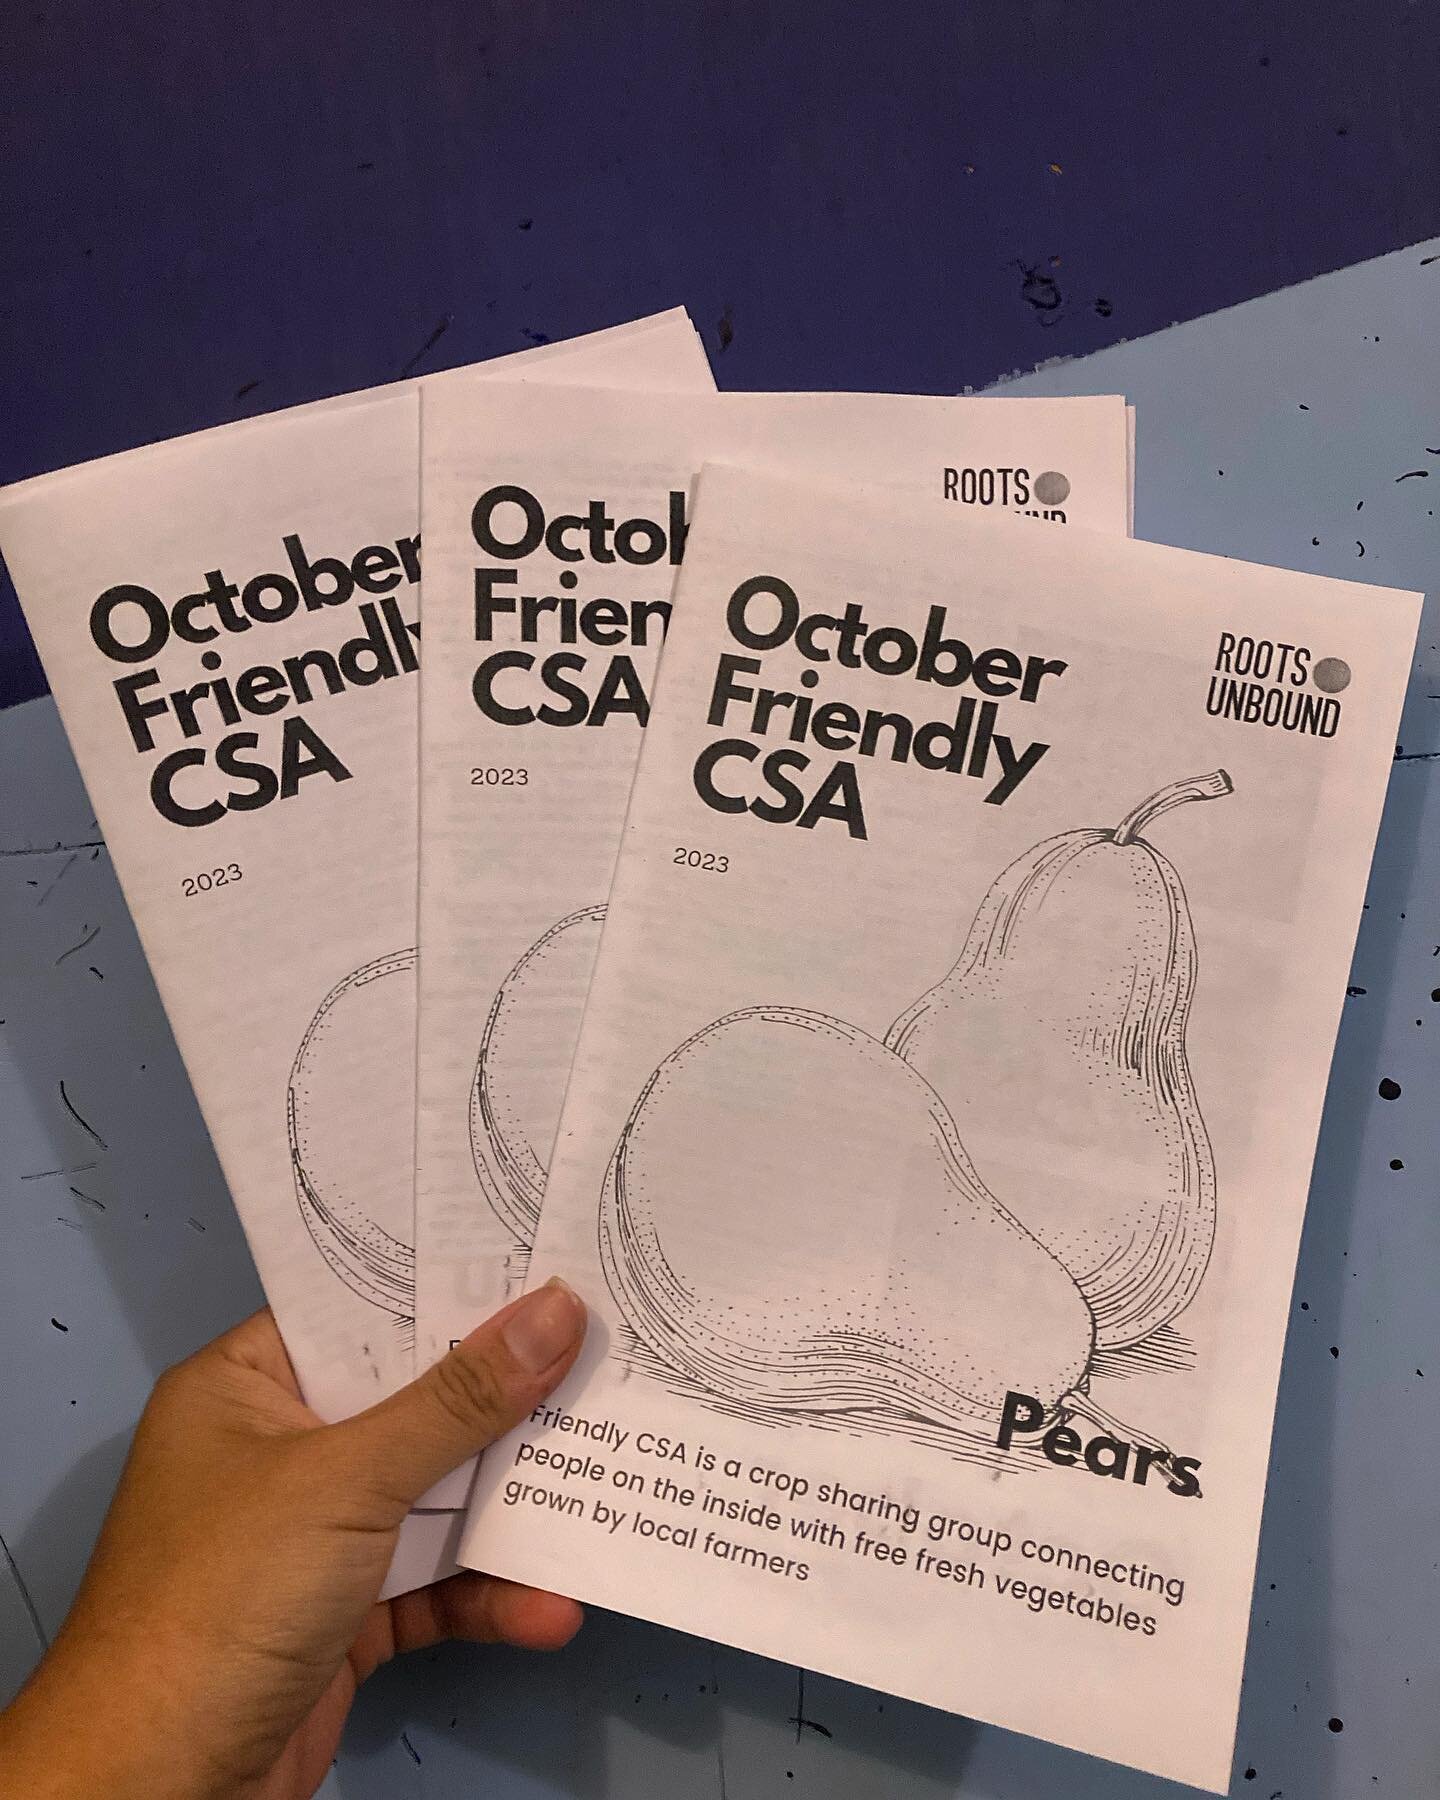 October FRIENDLY CSA newsletters went out this past week! Pears 🍐 are our highlight of the month!